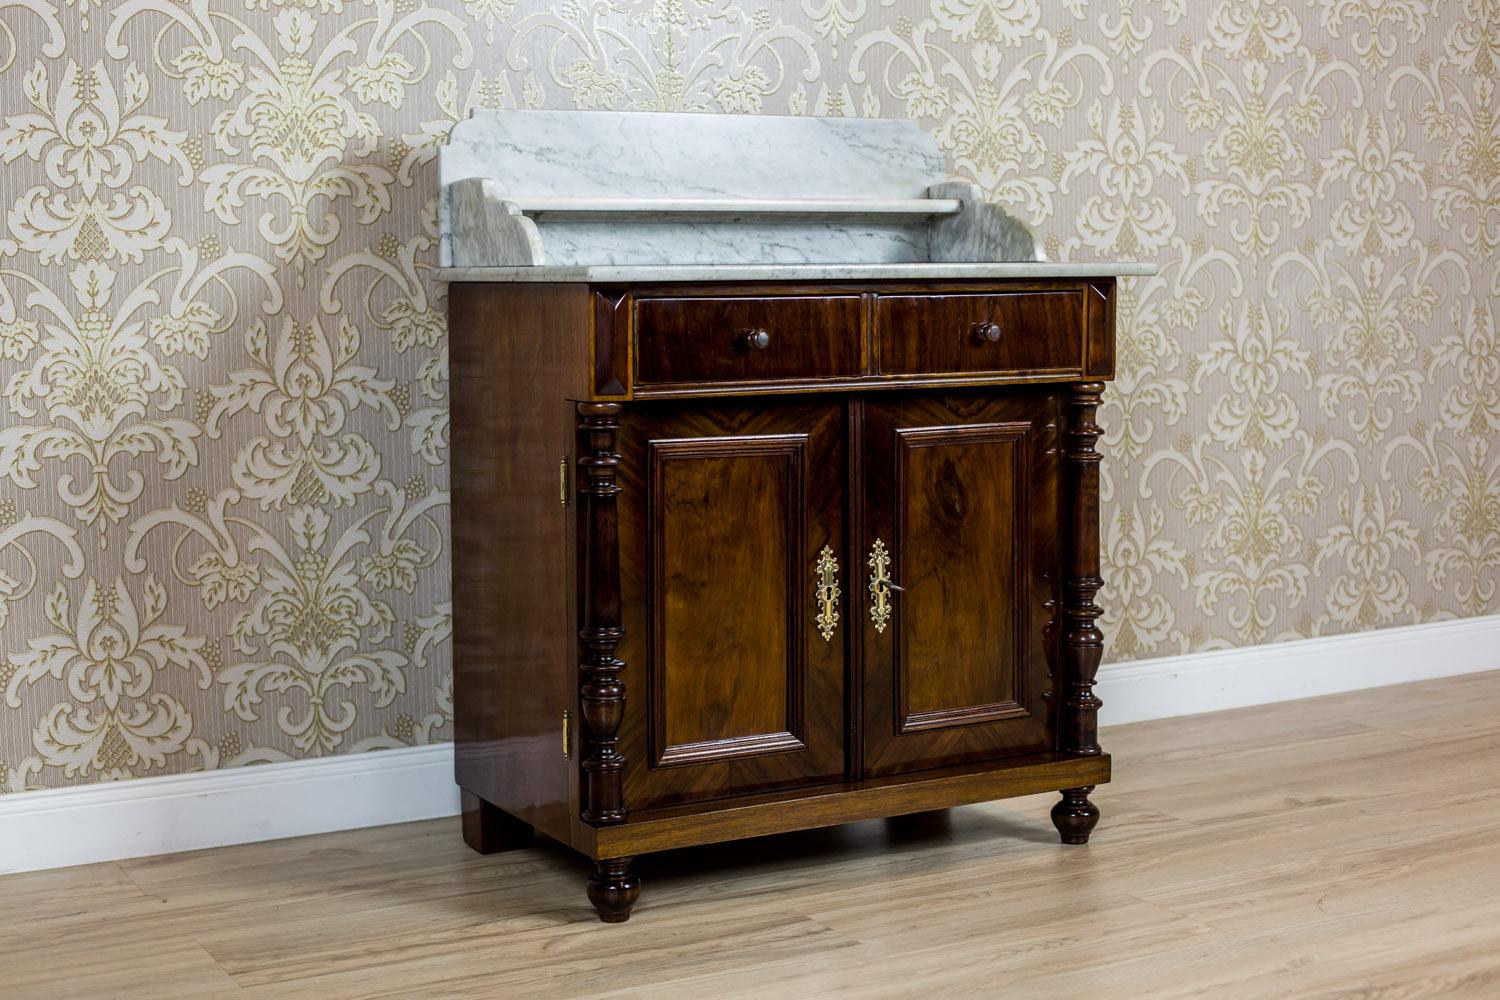 We present you a small Eclectic piece of furniture, circa the late 19th century, which in the past was used as a basin cabinet.
This piece of furniture is double-leaf, with two drawers under the top, and crowned with a marble top; also with a